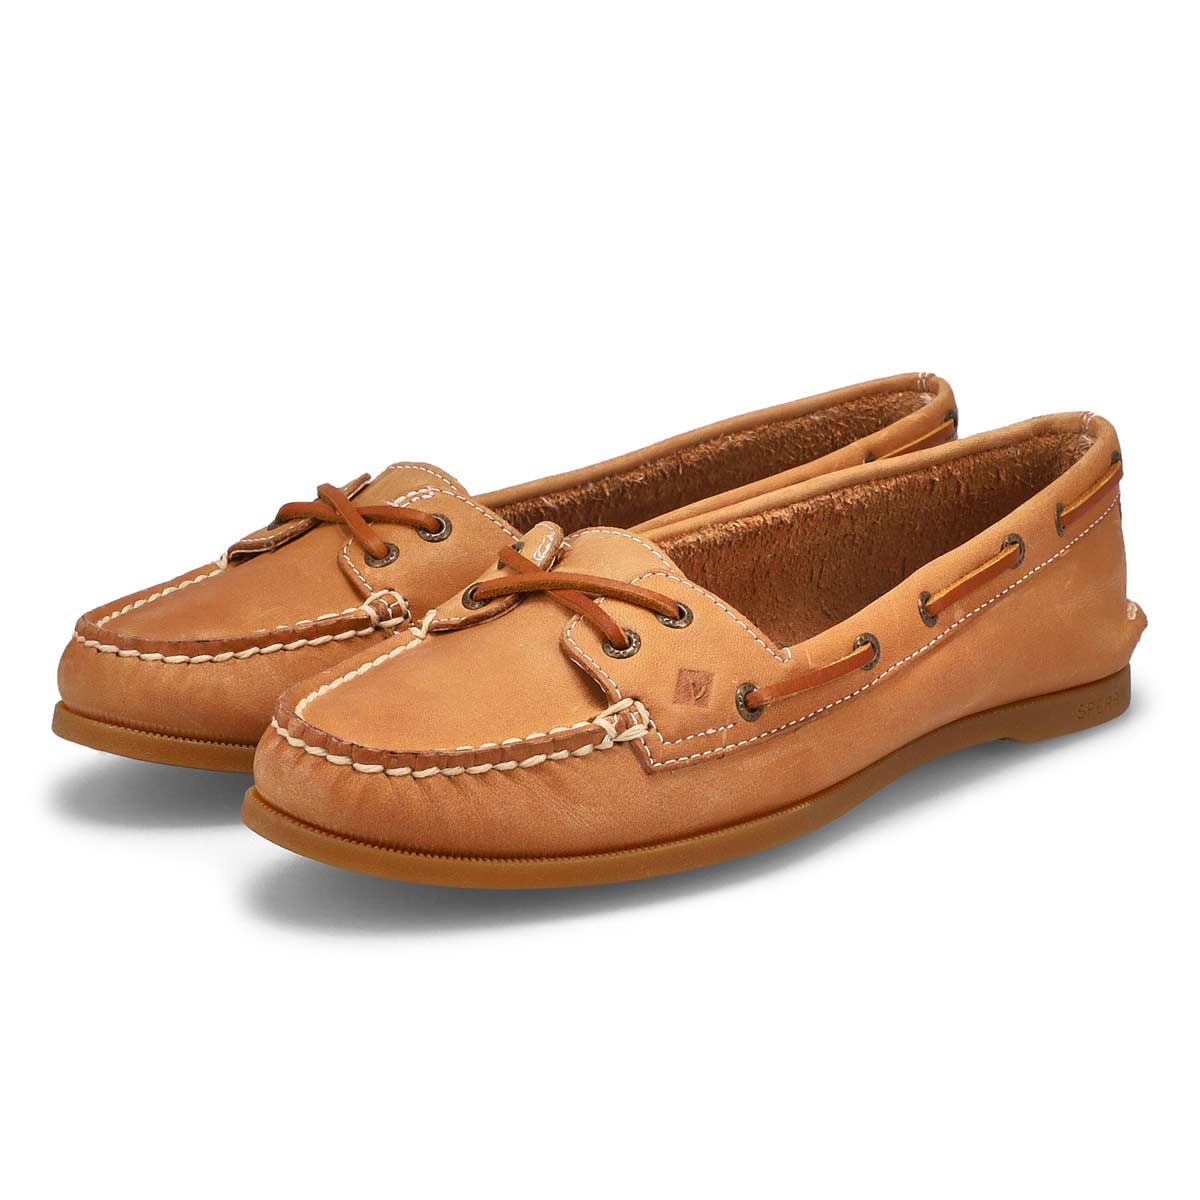 Sperry Top-Sider Authentic Original Skimmer Boat Shoe Women's